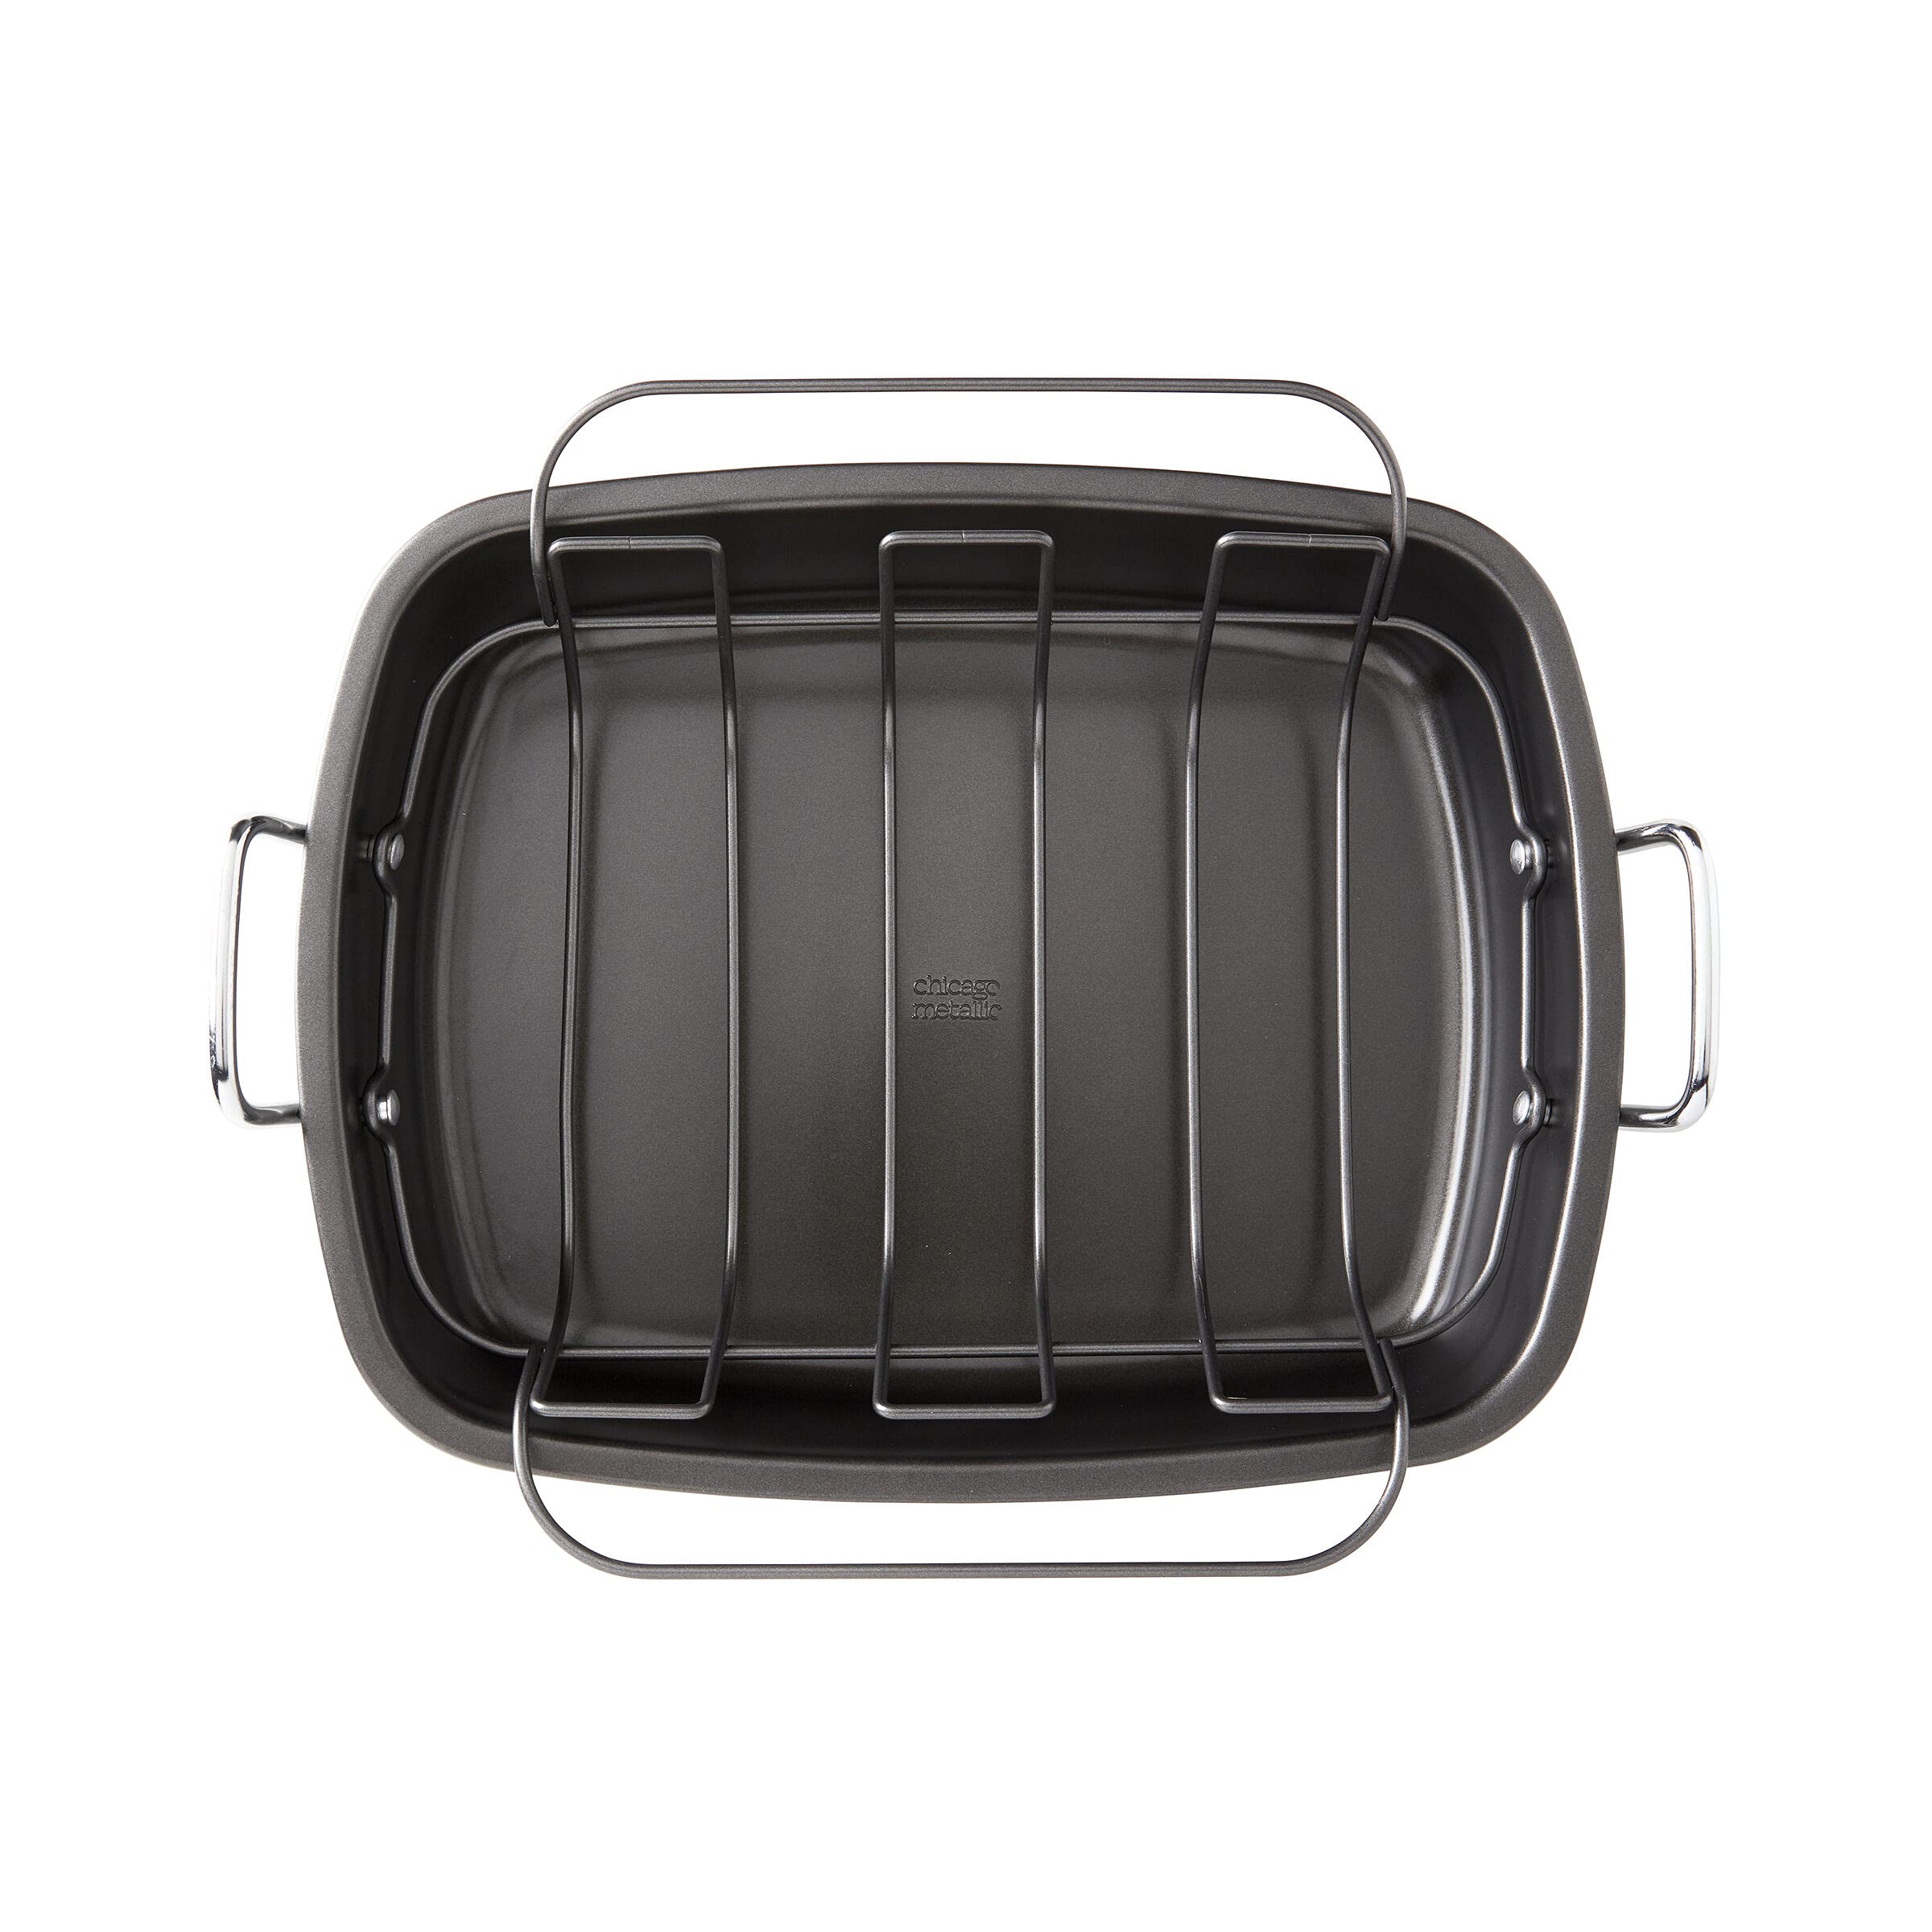 Chicago Metallic Nonstick Roaster with Floating Rack, 18-Inch-by-13-Inch, Black